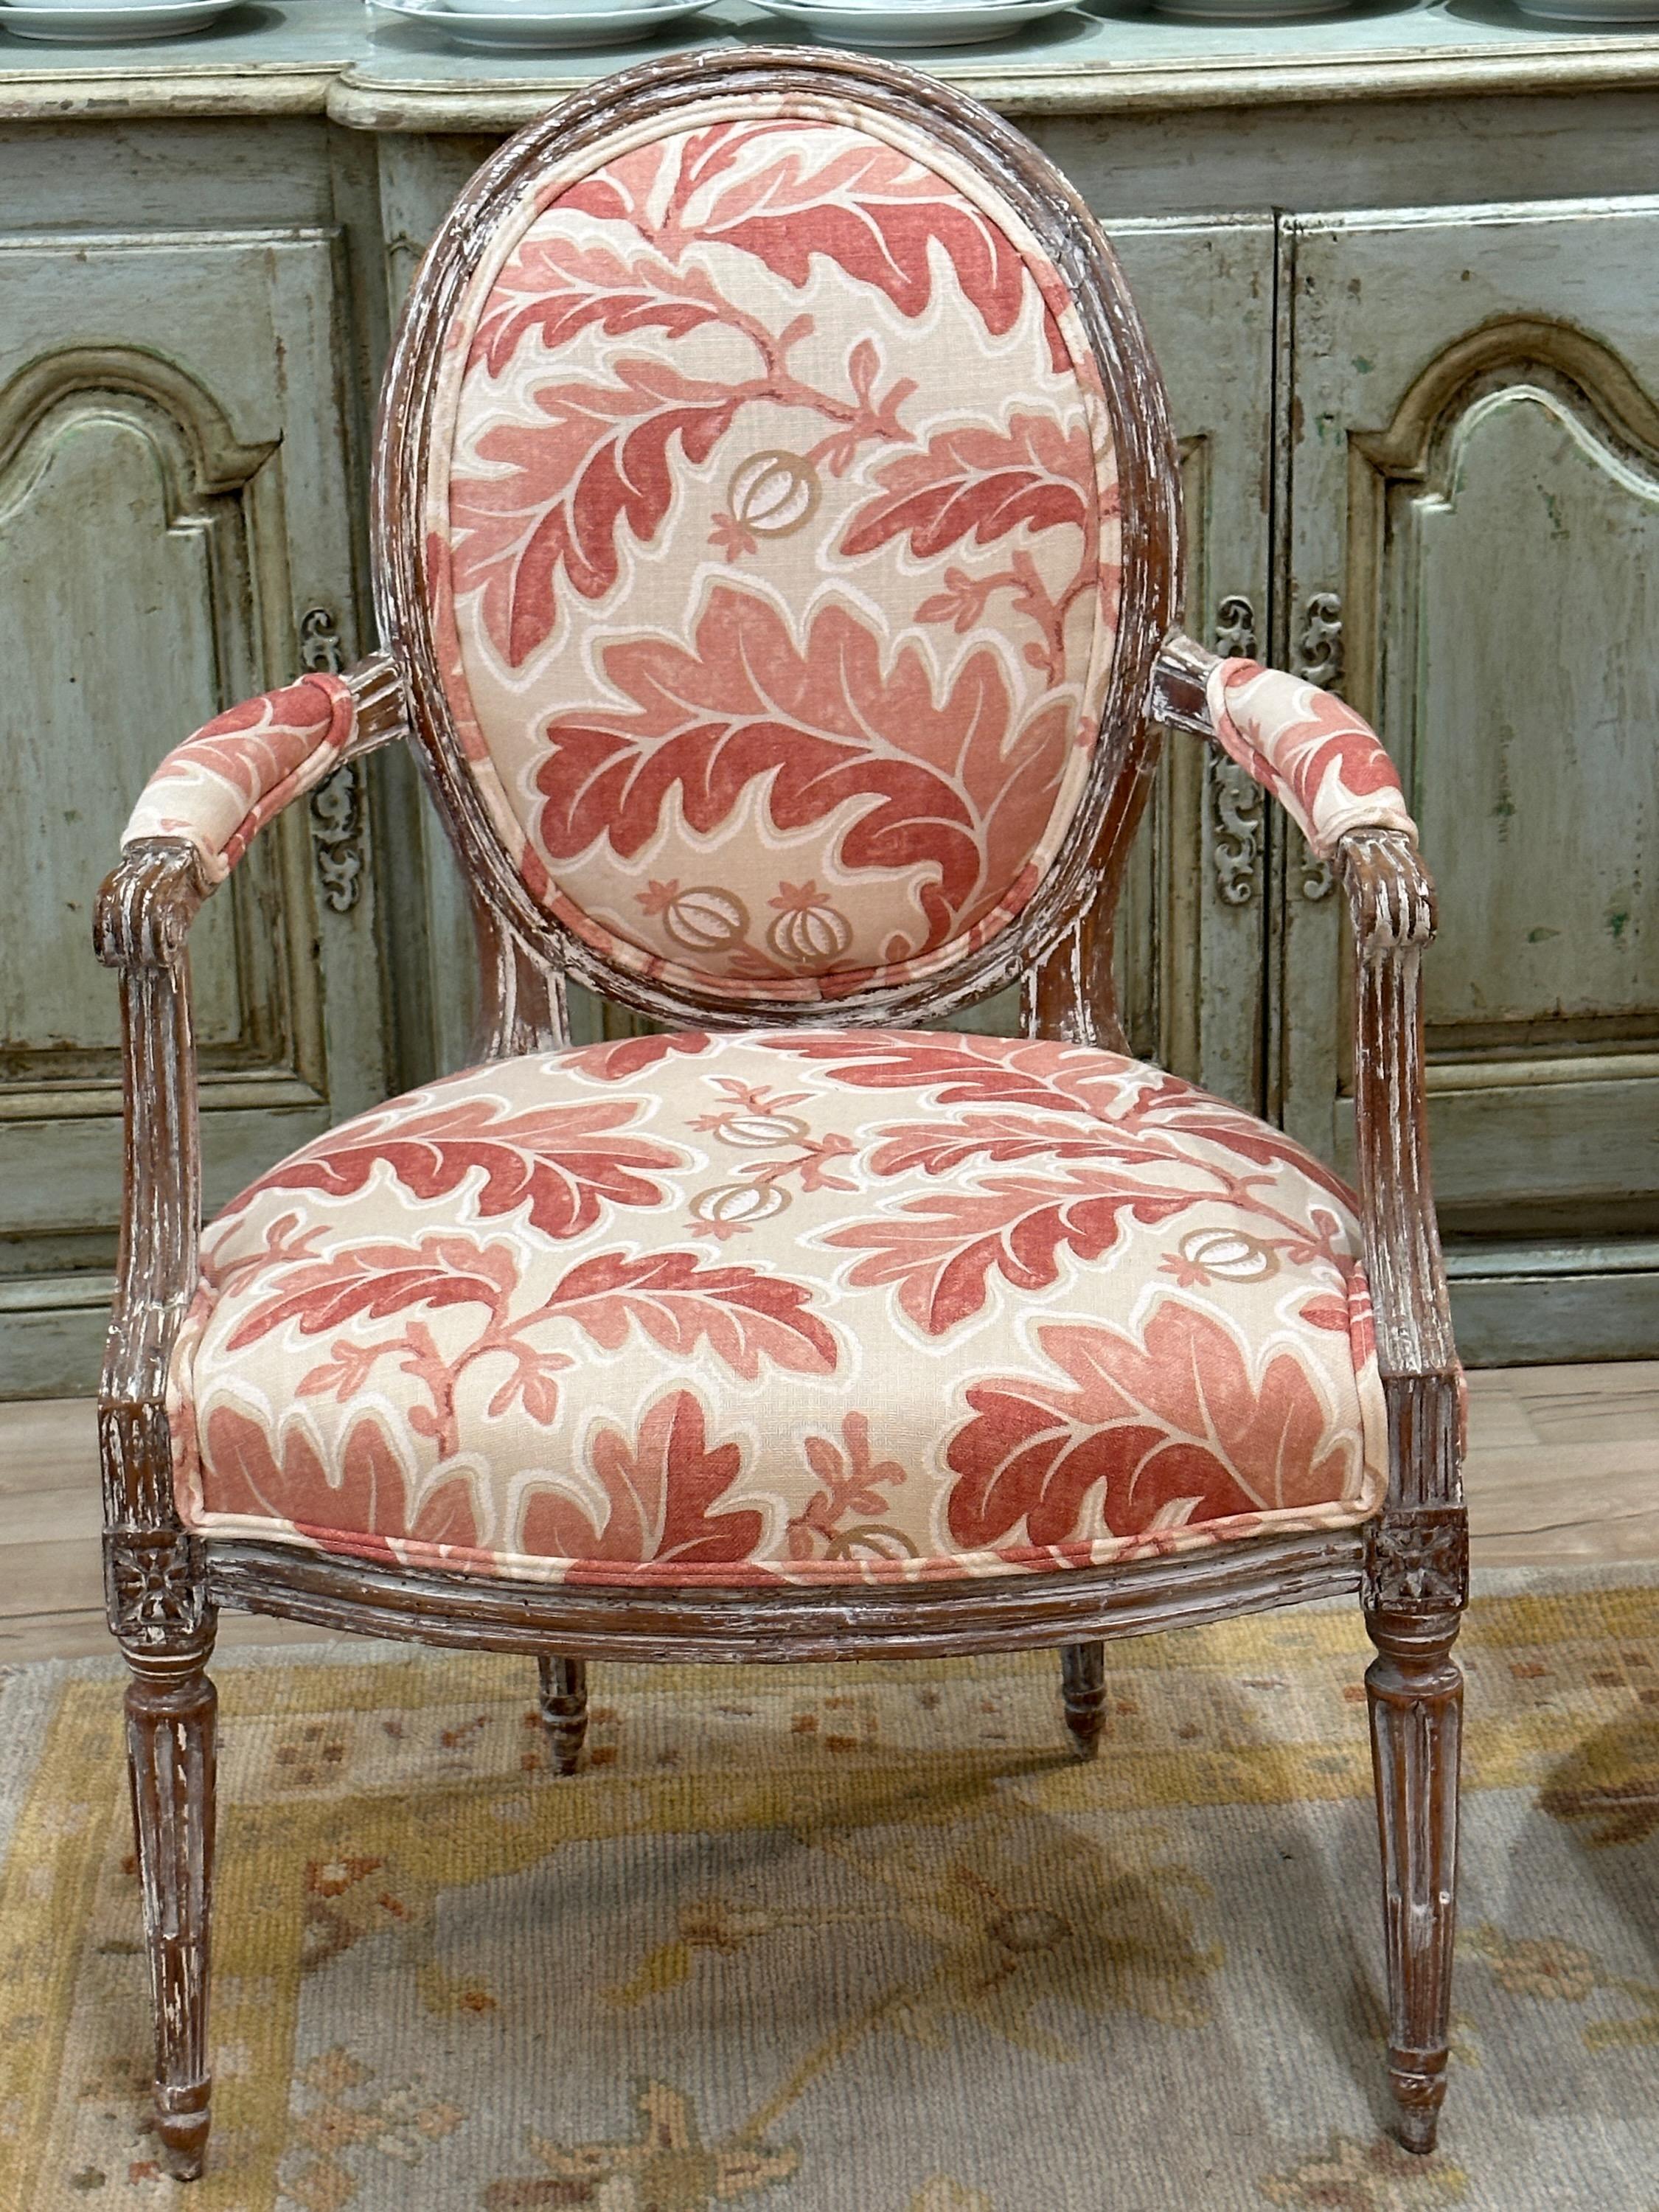 A pair of late 18th c. French fauteuils elegantly carved, retaining old traces of paint over exposed wood, recently upholstered in a pink and cream Colefax & Fowler linen fabric.